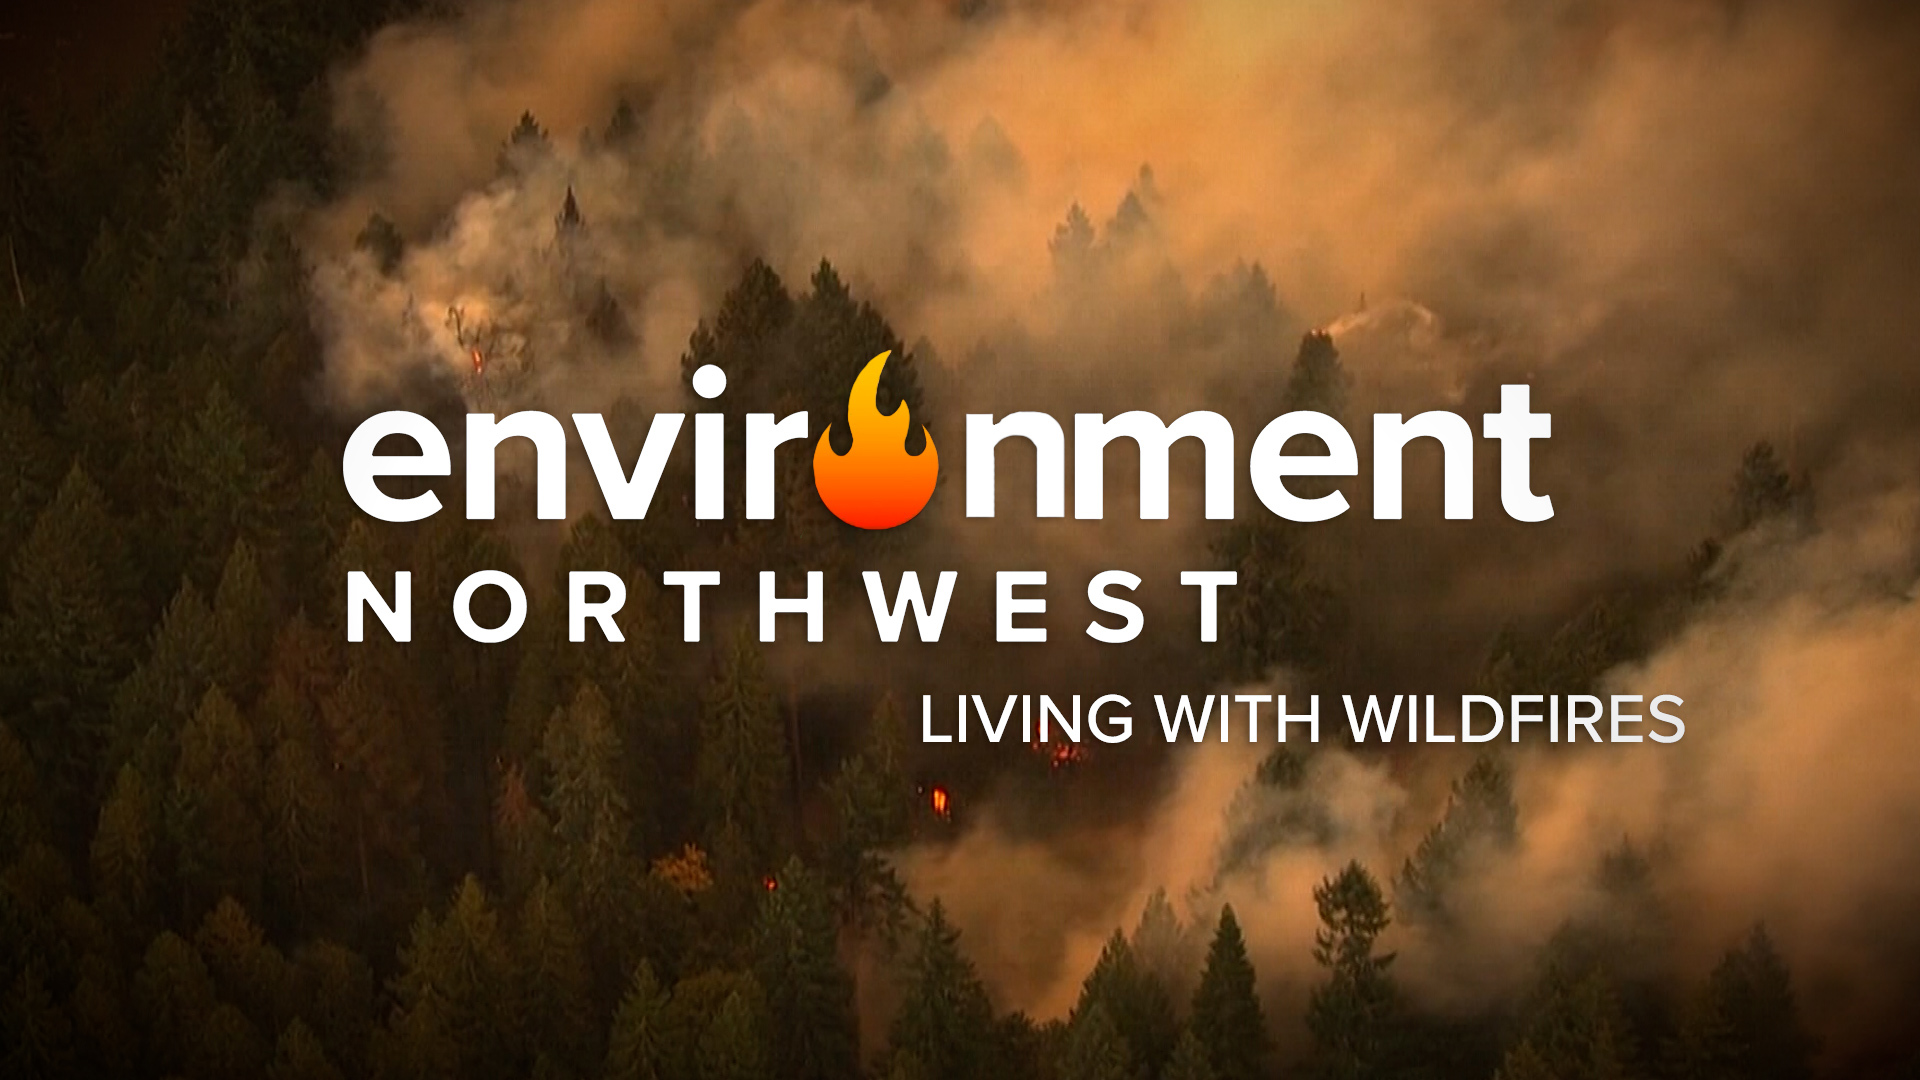 The Environment Northwest teams looks at the causes, the effects and the rebuilding process following the Northwest's devastating wildfires.